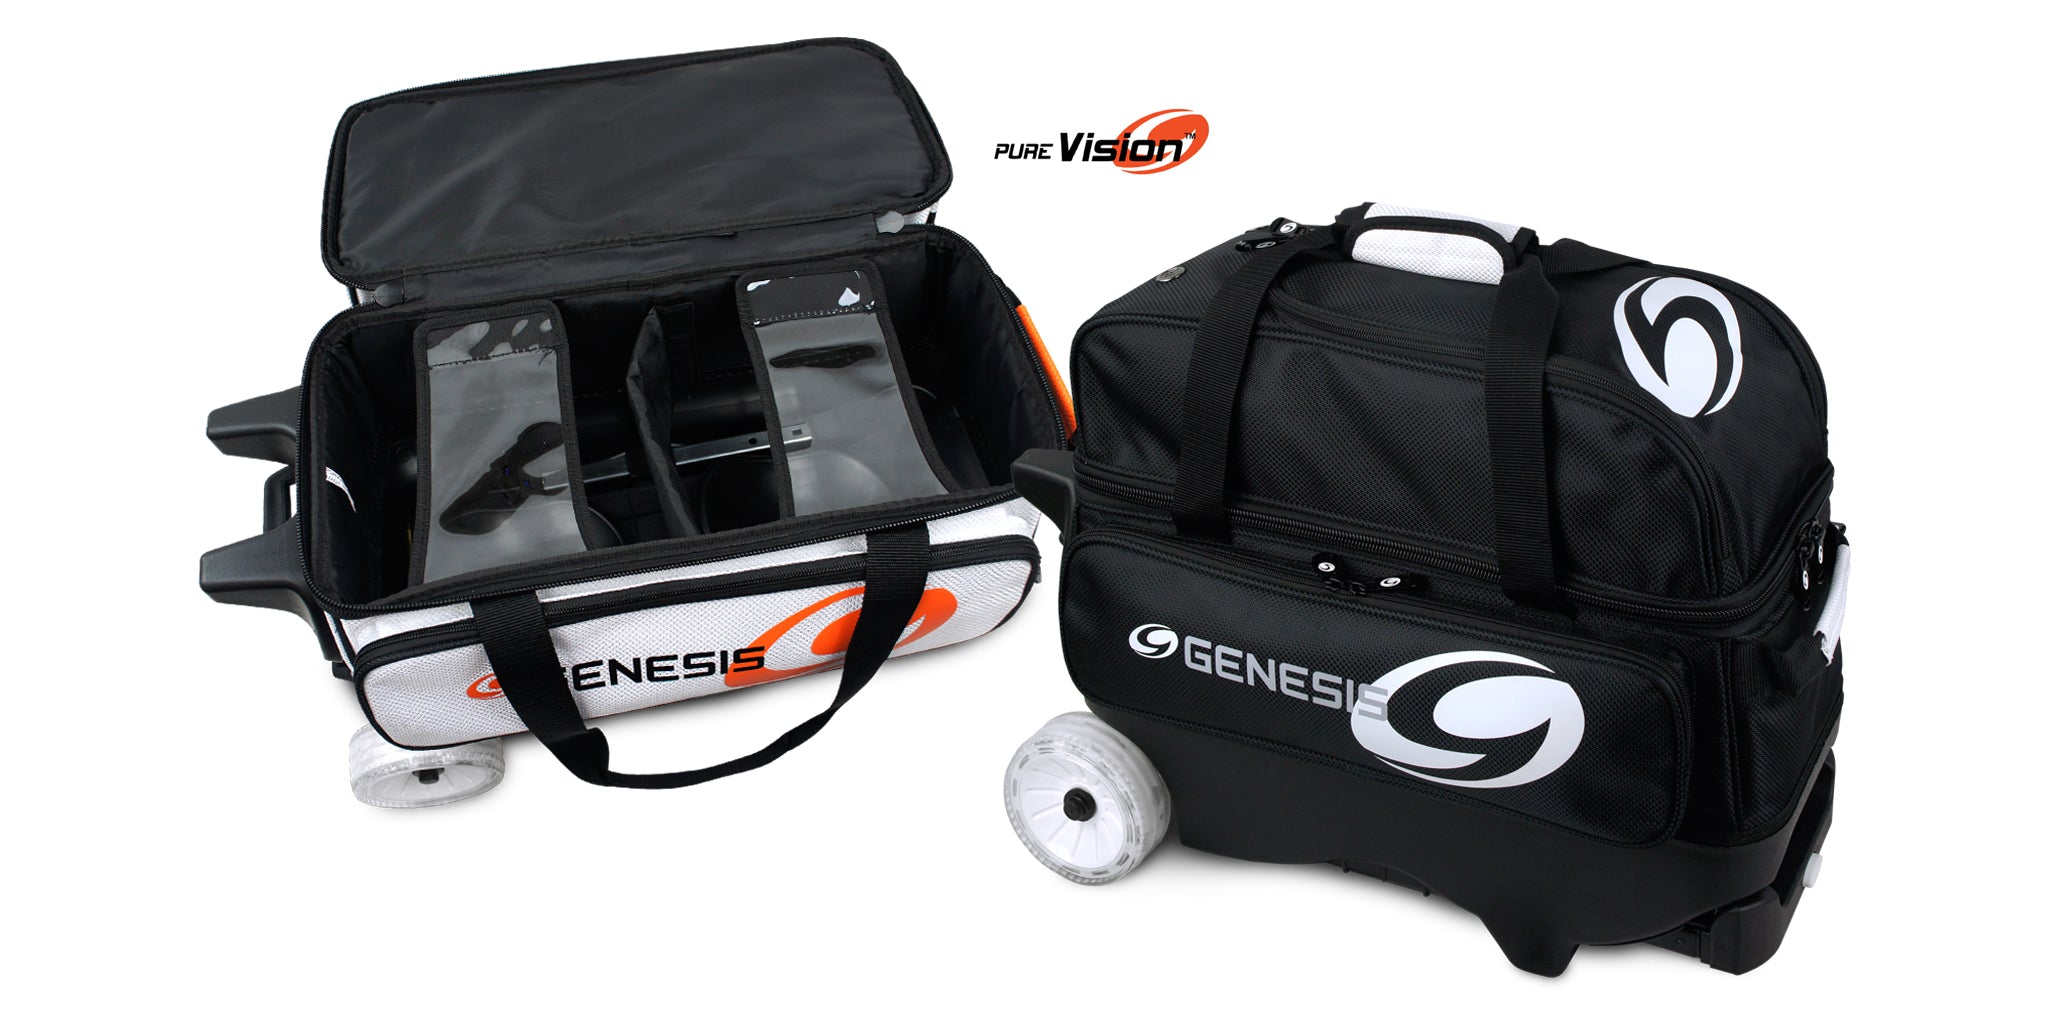 Genesis® Sport™ 2 Ball Roller Bag™ featuring Pure Vision™